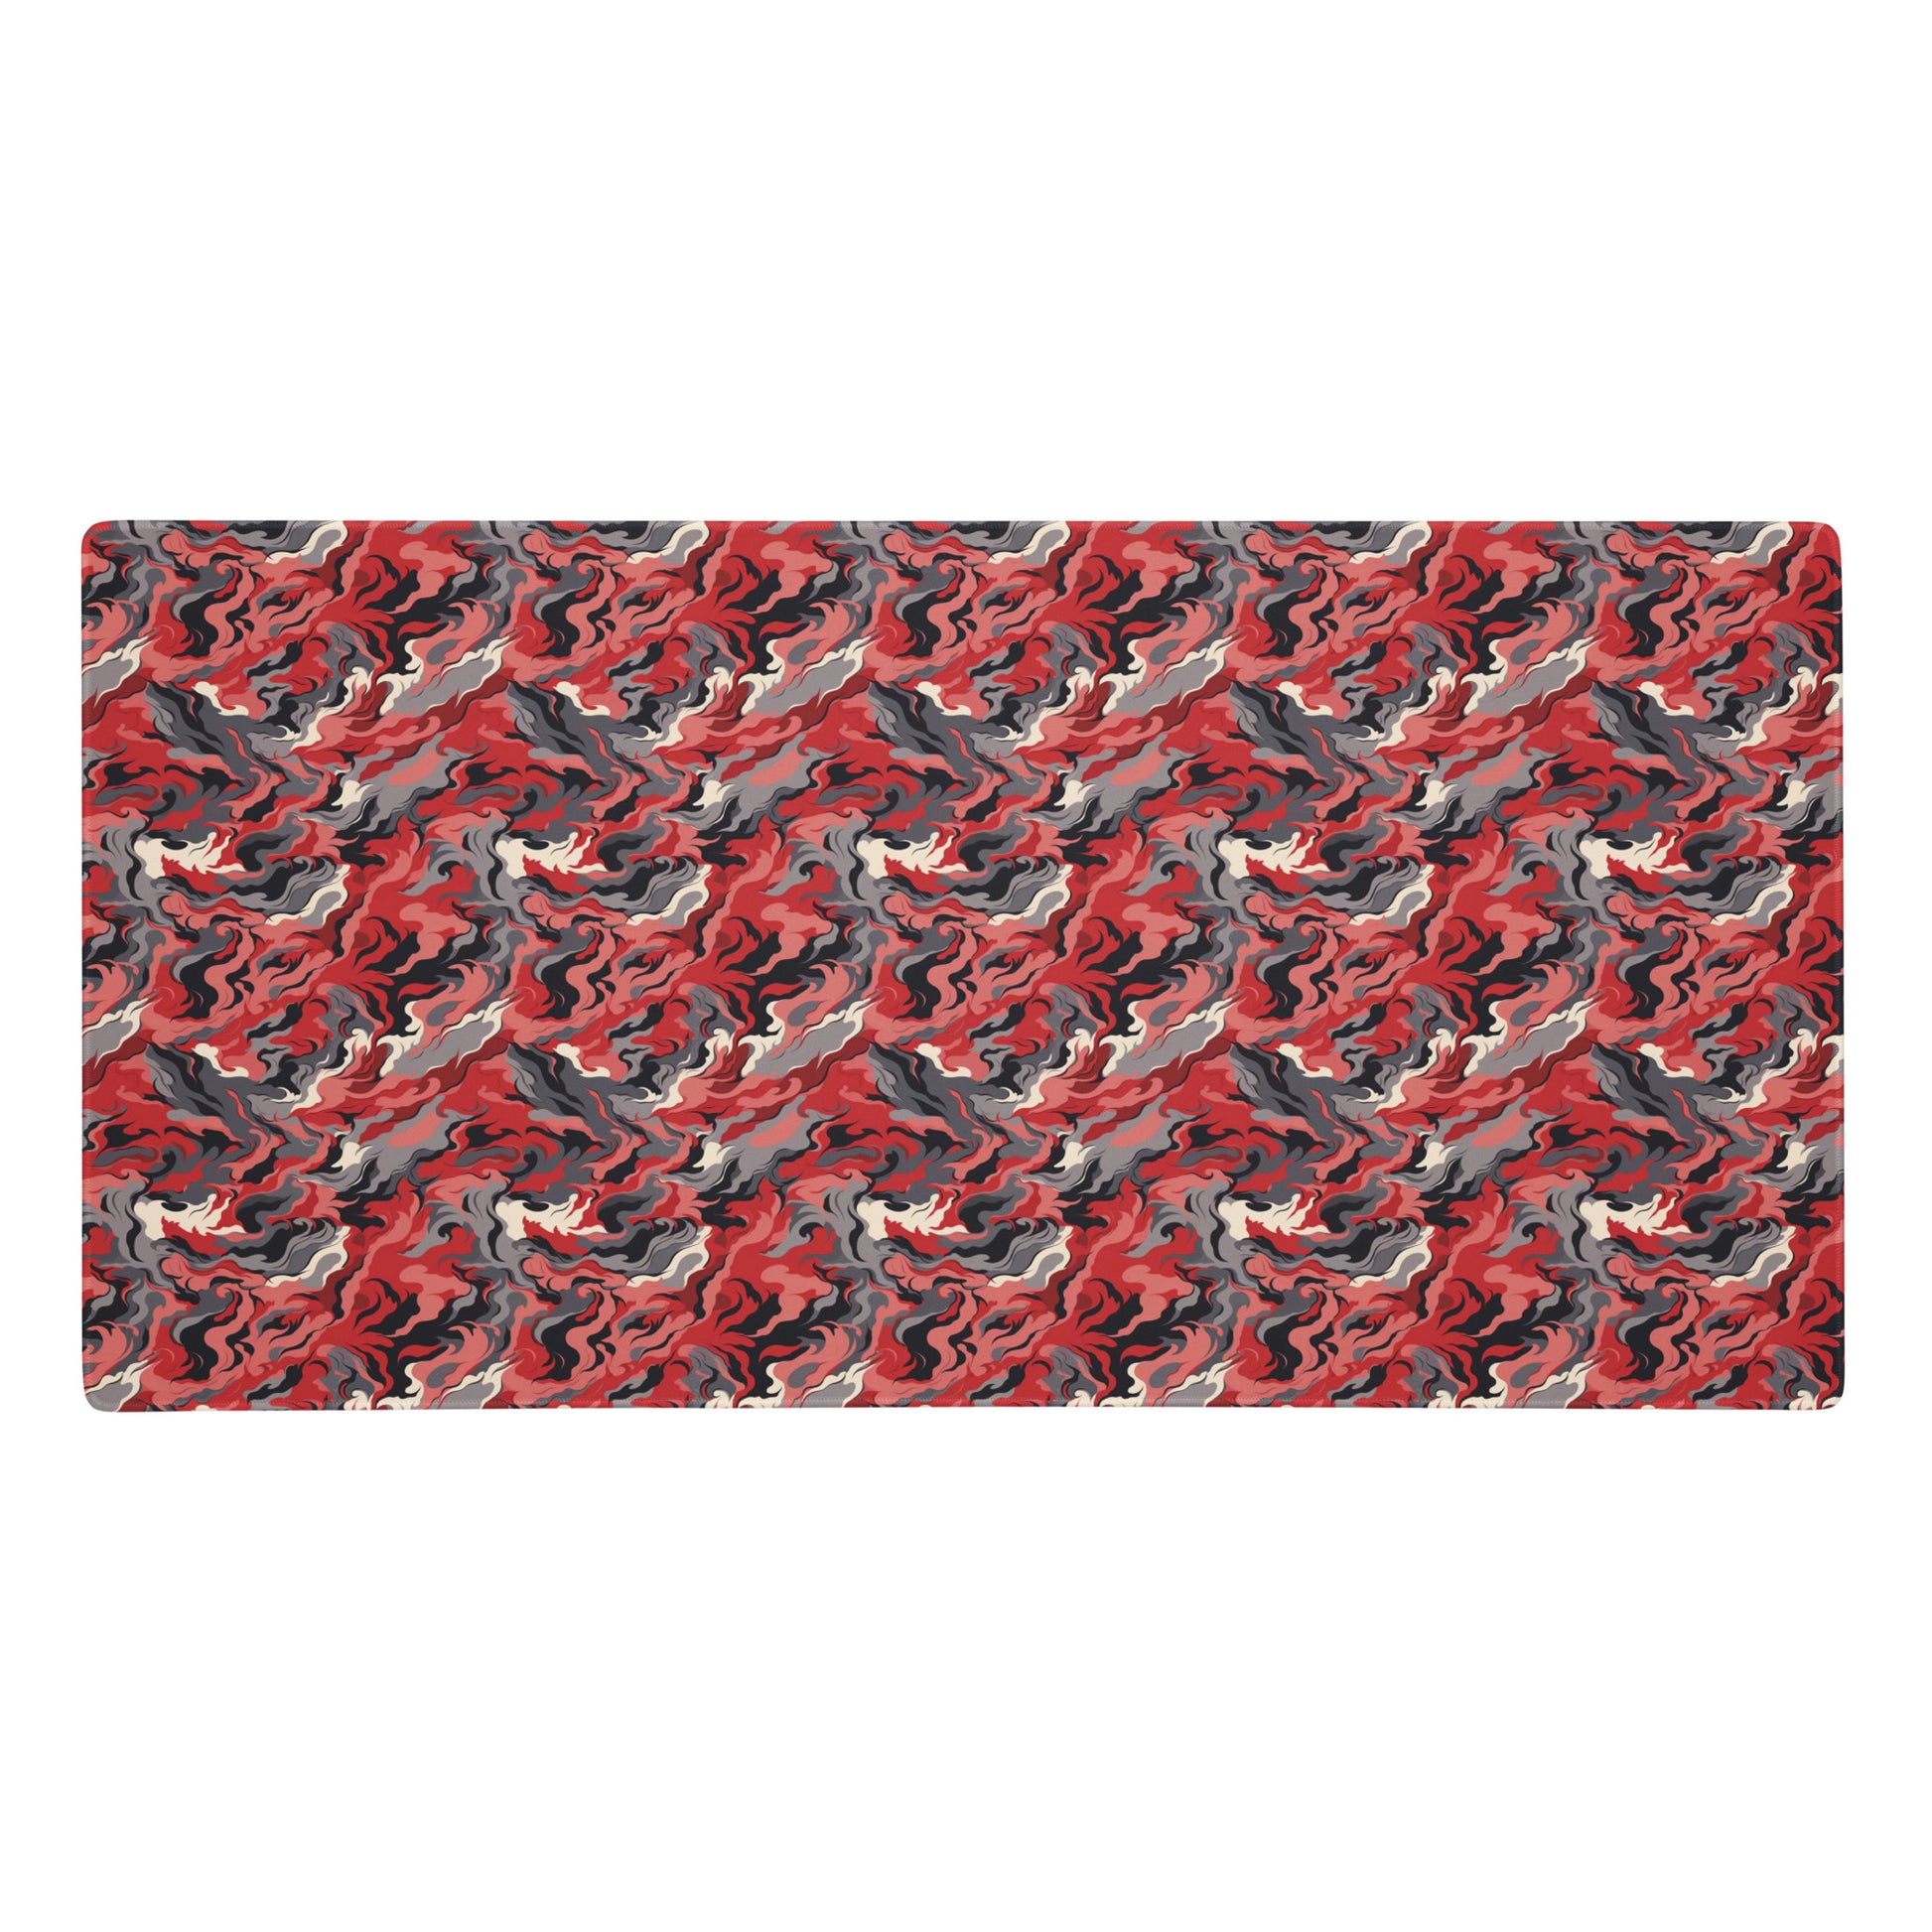 A 36" x 18" desk pad with a grey and red camo pattern.